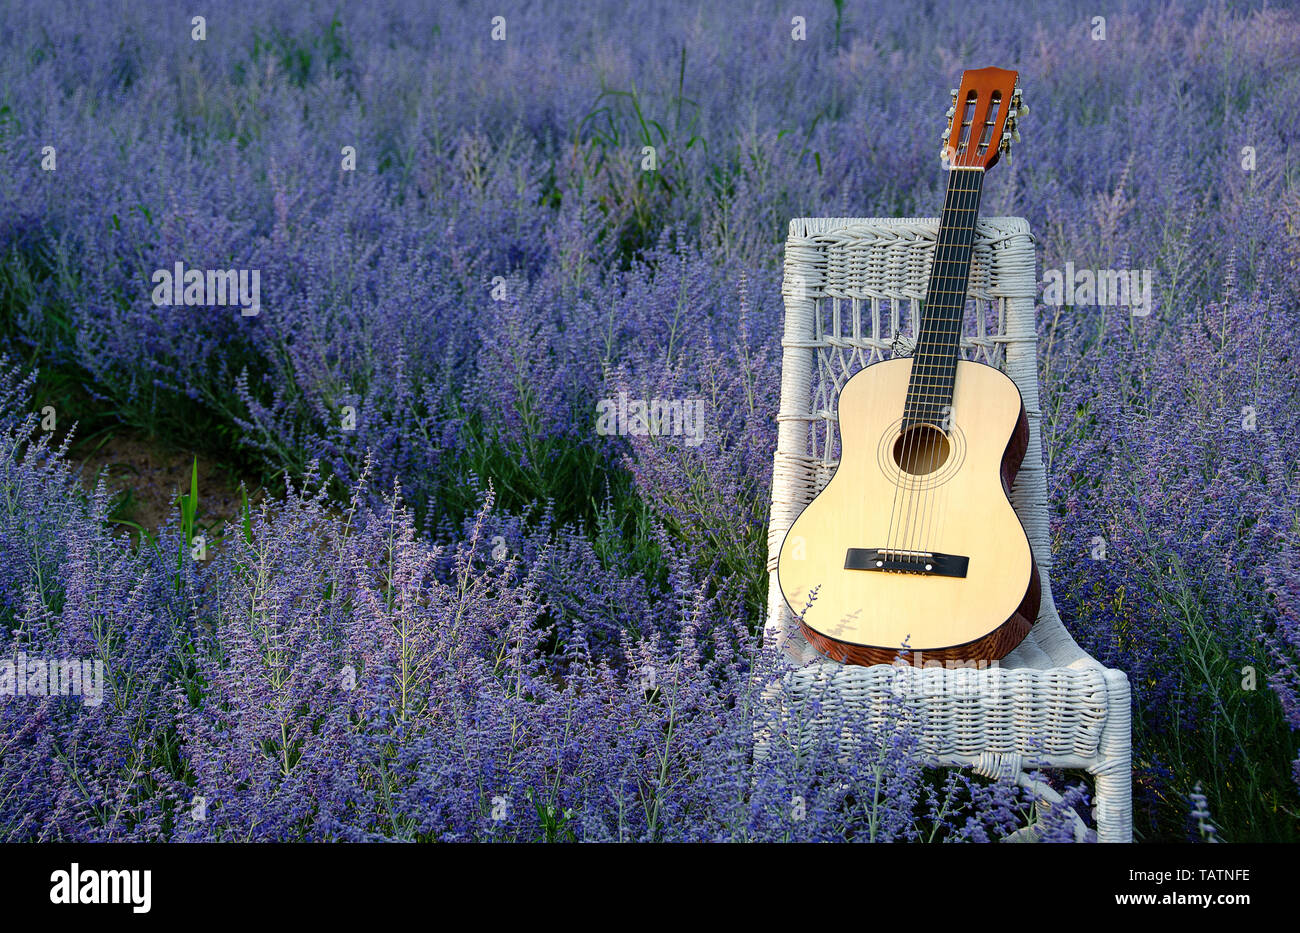 Six string acoustical guitar on white wicker chair in purple Russian Sage field Stock Photo